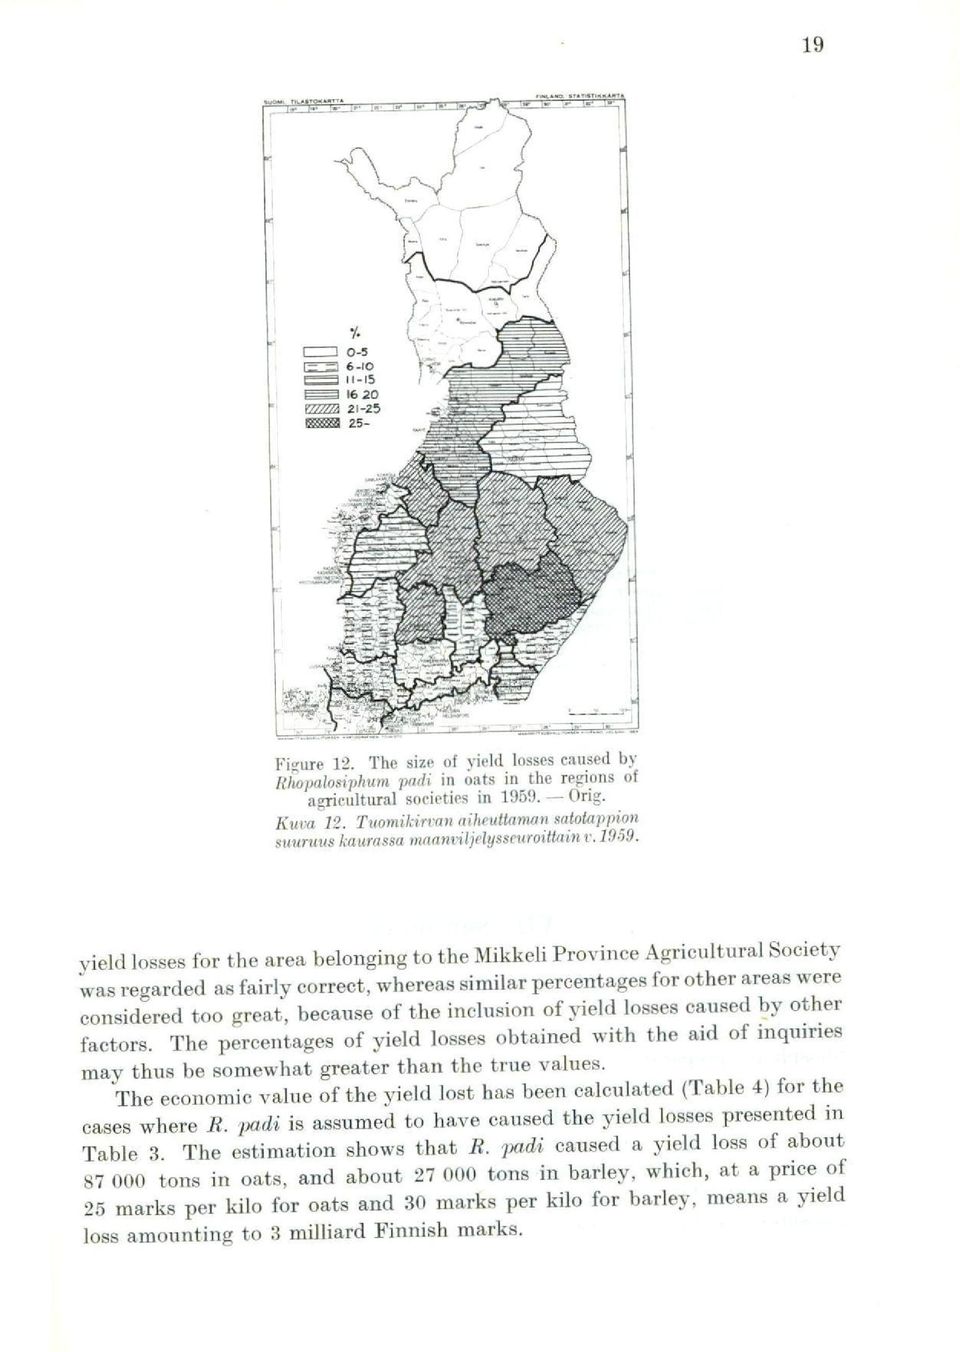 yield losses for the area belonging to the Mikkeli Province Agricultural Society was regarded as fairly correct, whereas similar percentages for other areas were considered too great, because of the